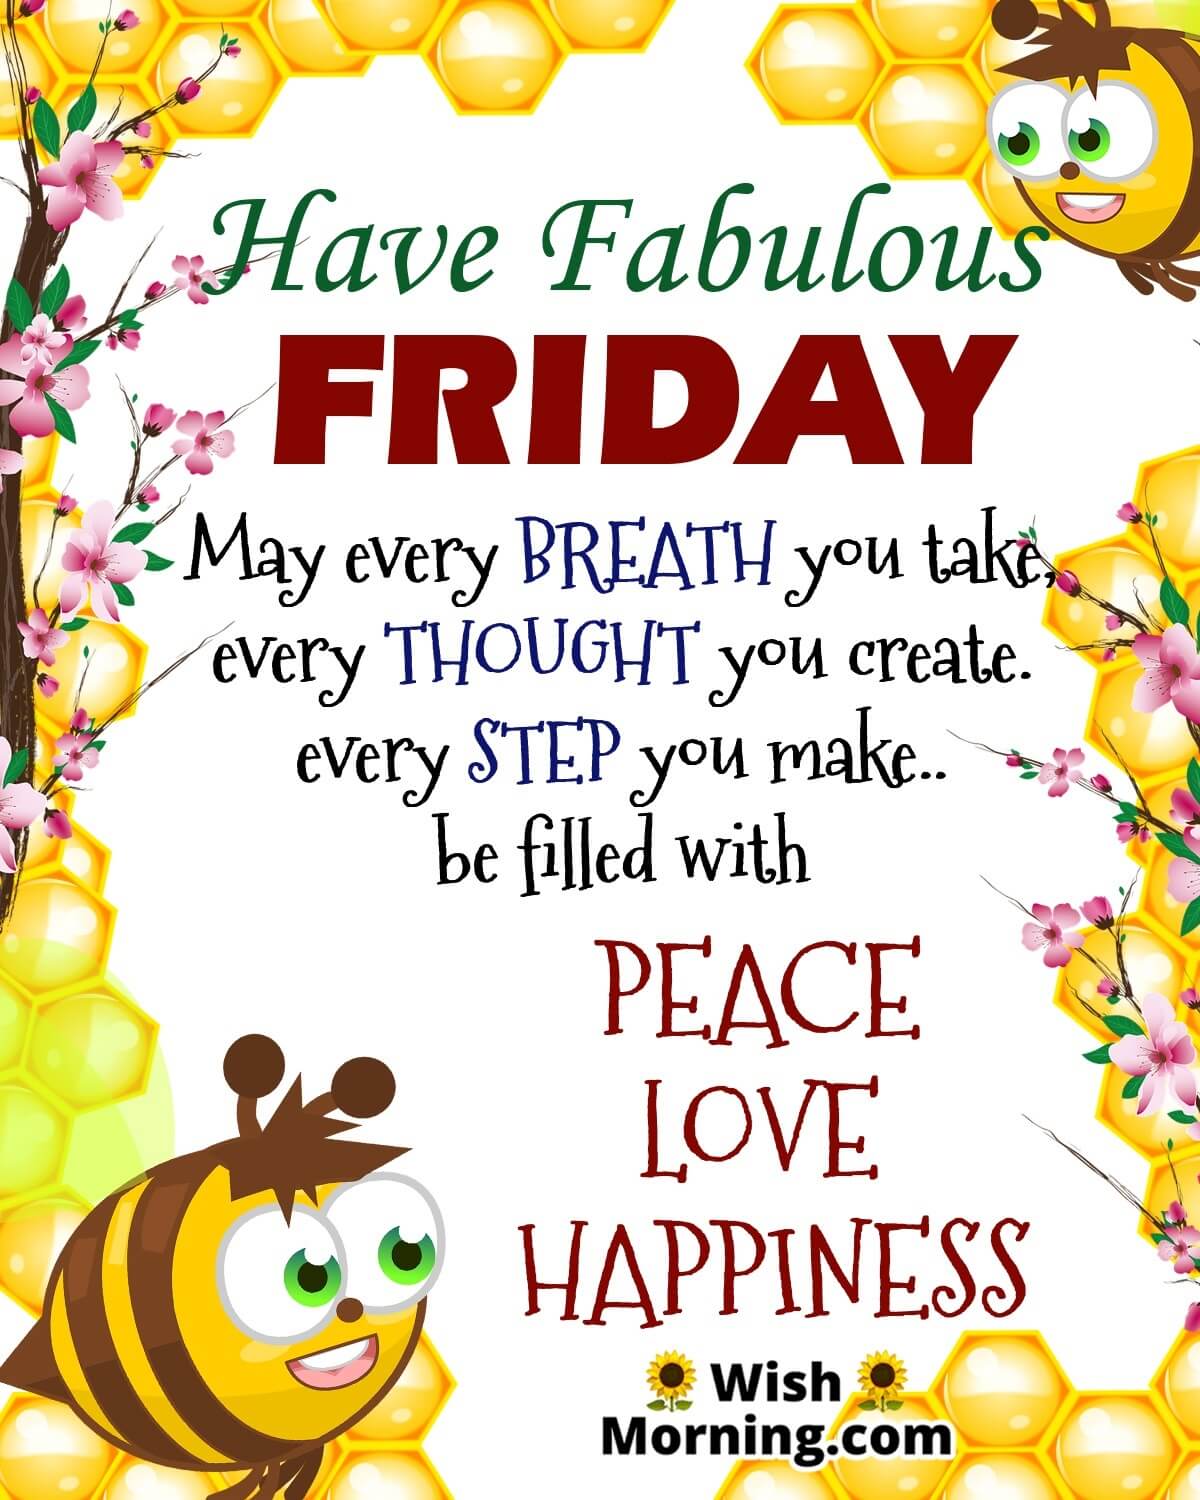 Have A Fabulous Friday Wishes